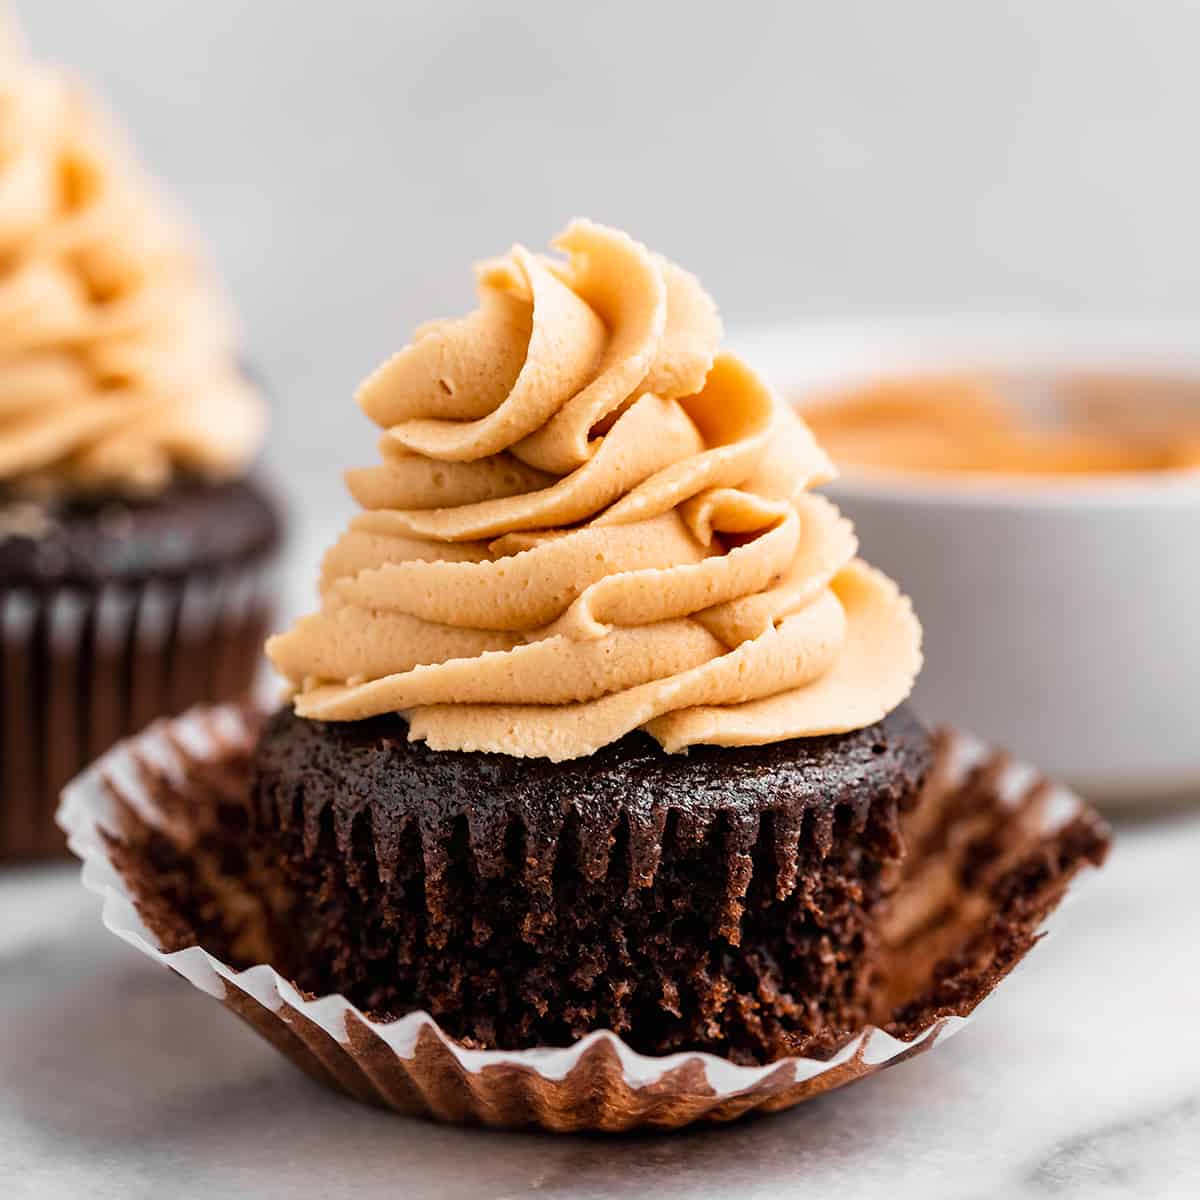 Peanut Butter Frosting piped on top of a chocolate cupcake